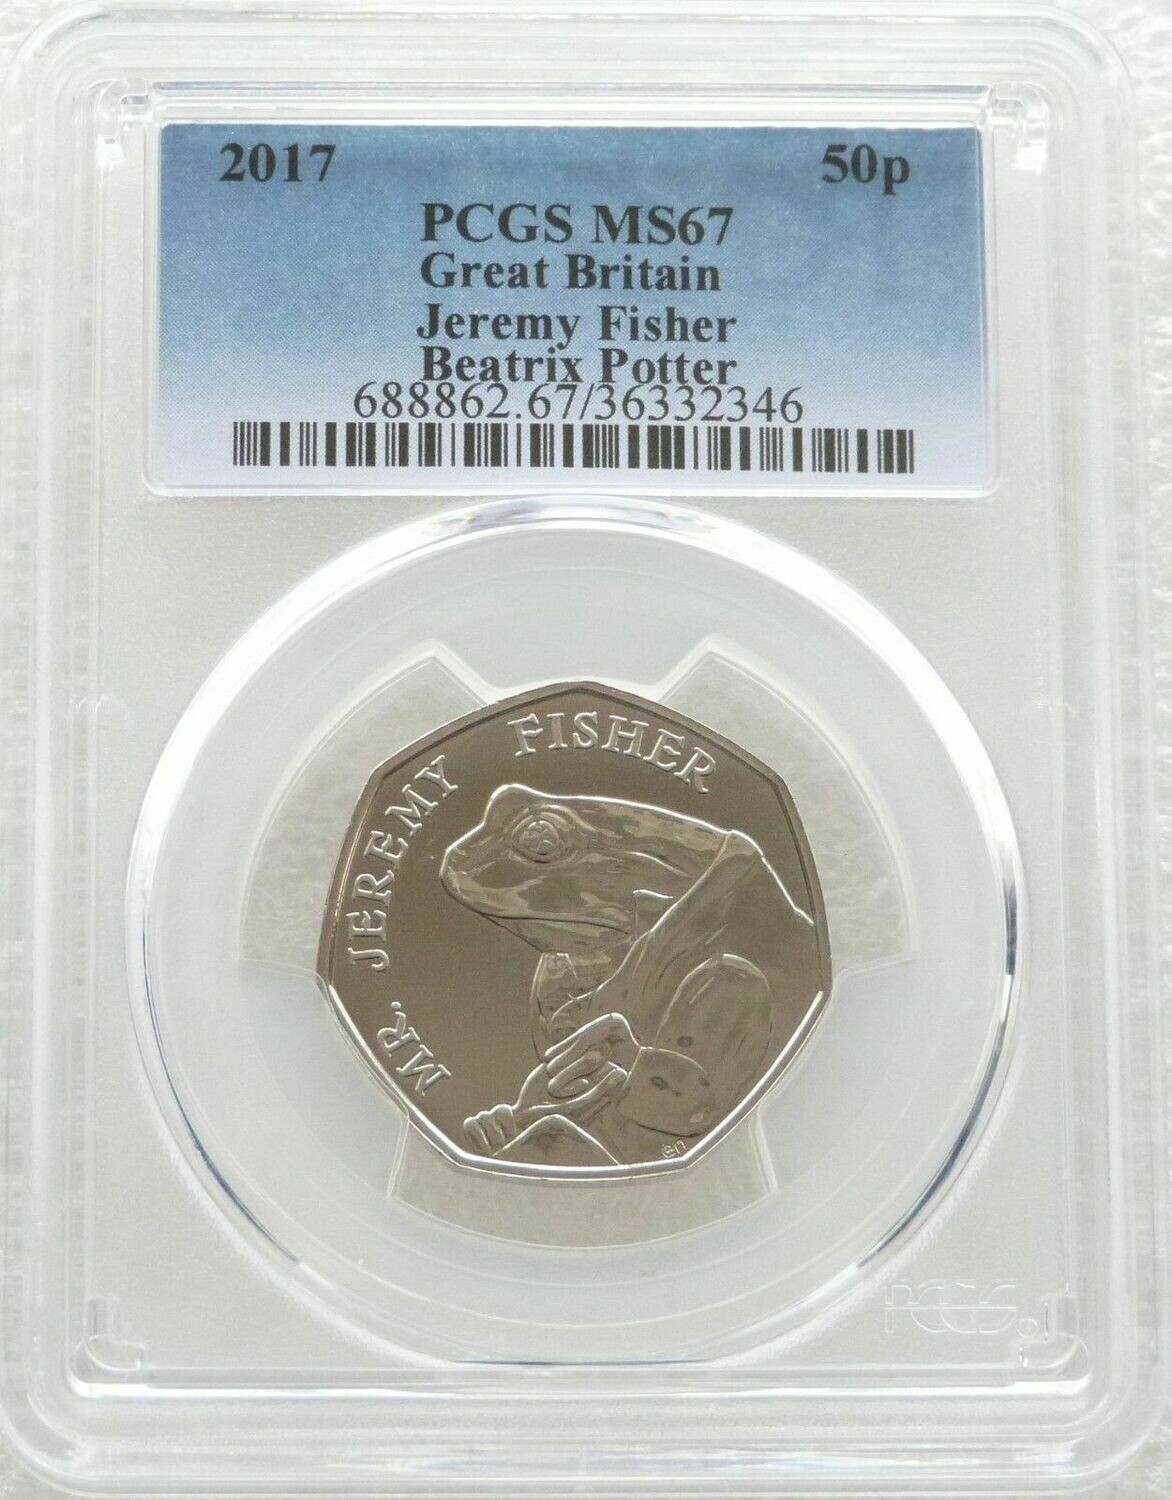 2017 Mr Jeremy Fisher 50p Brilliant Uncirculated Coin PCGS MS67